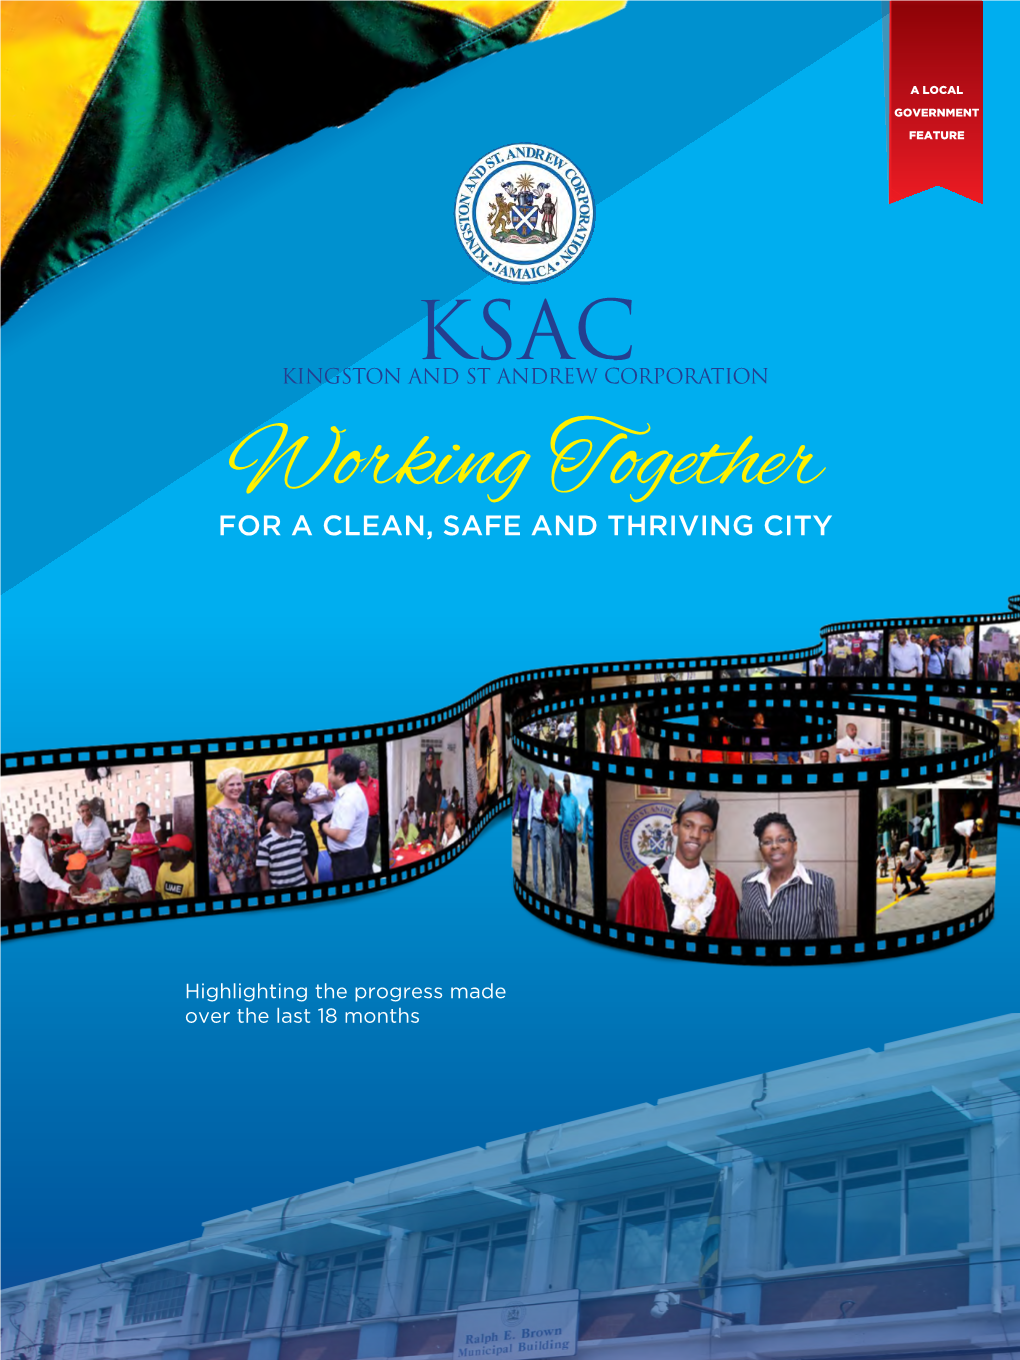 KSAC KINGSTON and ST ANDREW CORPORATION Working Together for a CLEAN, SAFE and THRIVING CITY